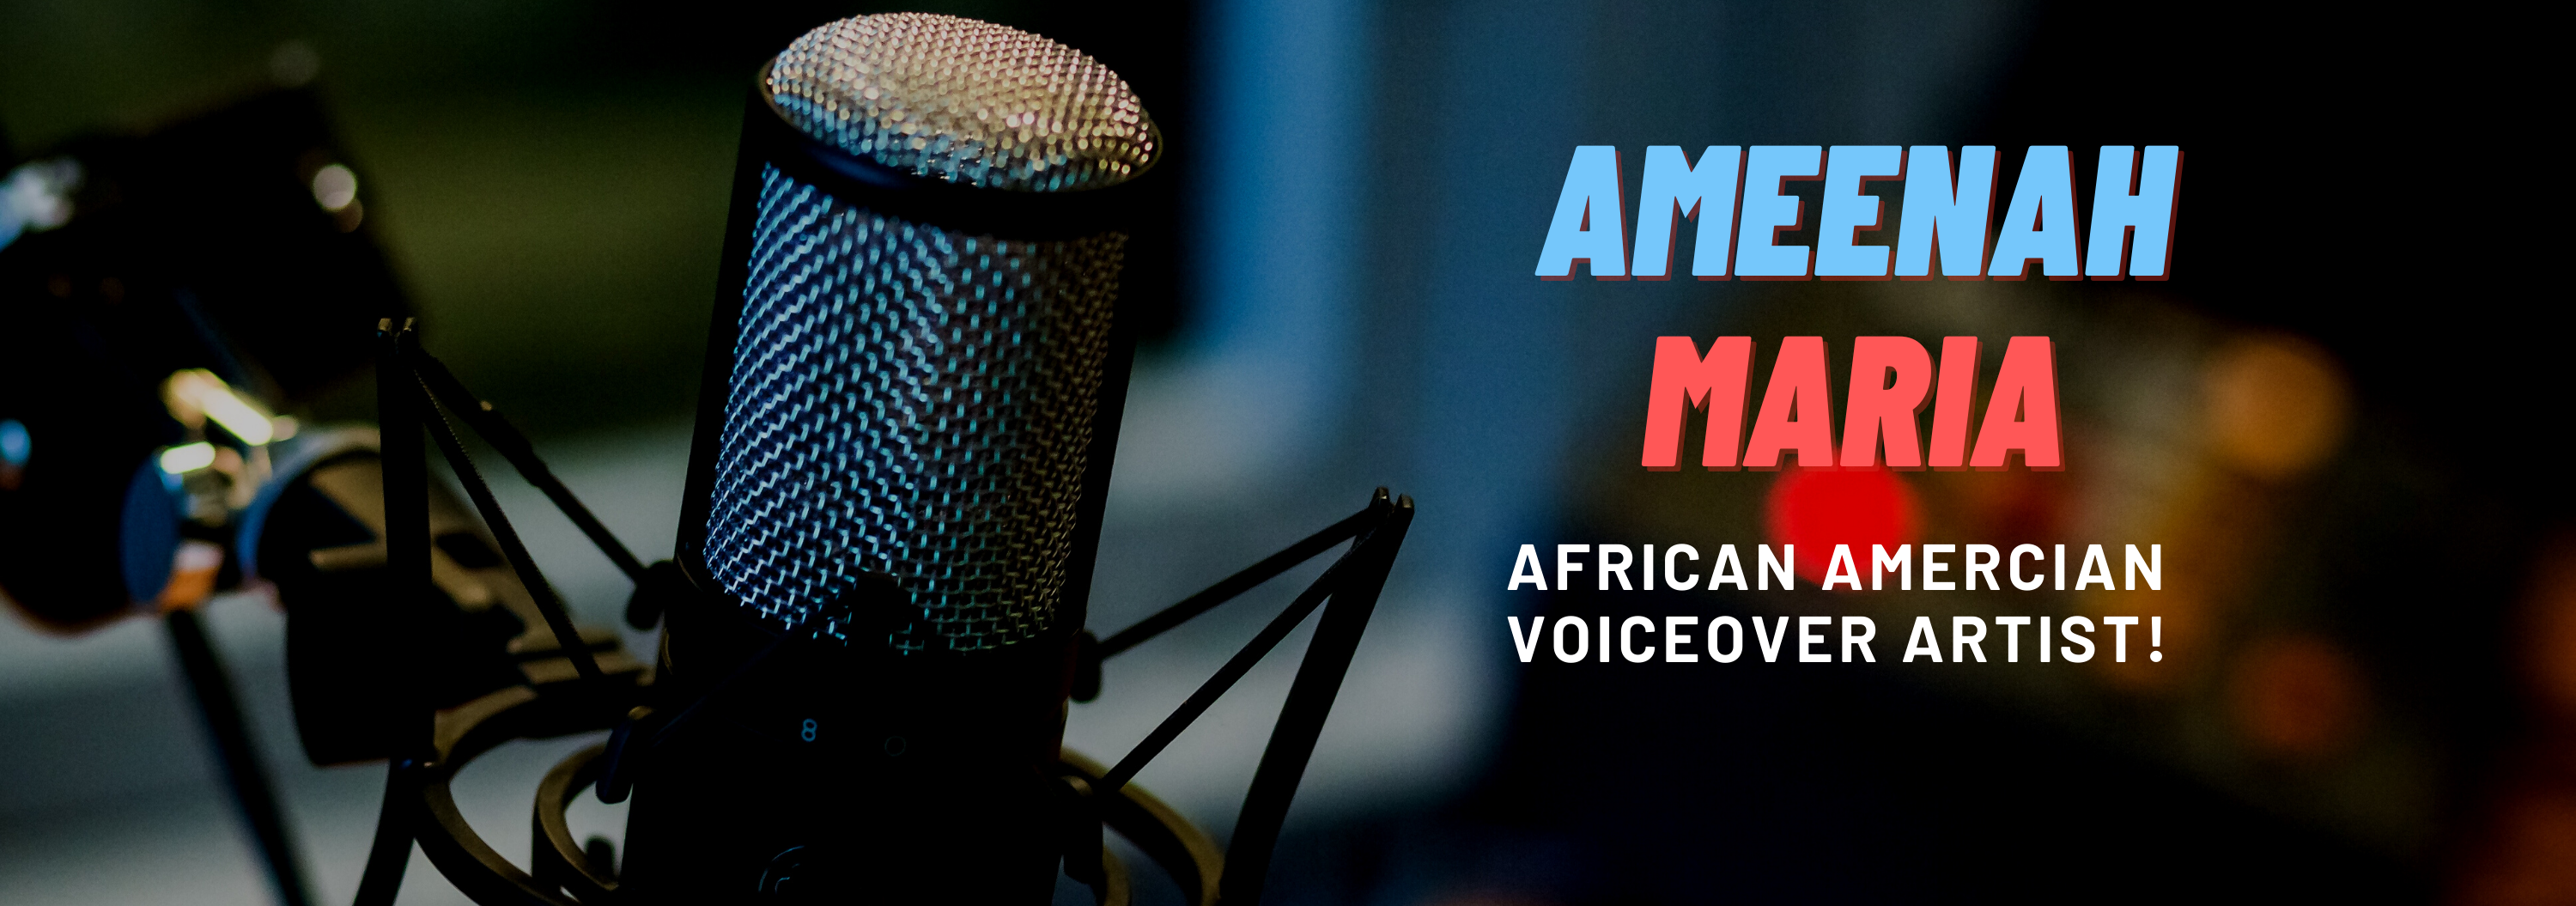 hire African american voice over artist services for your next project